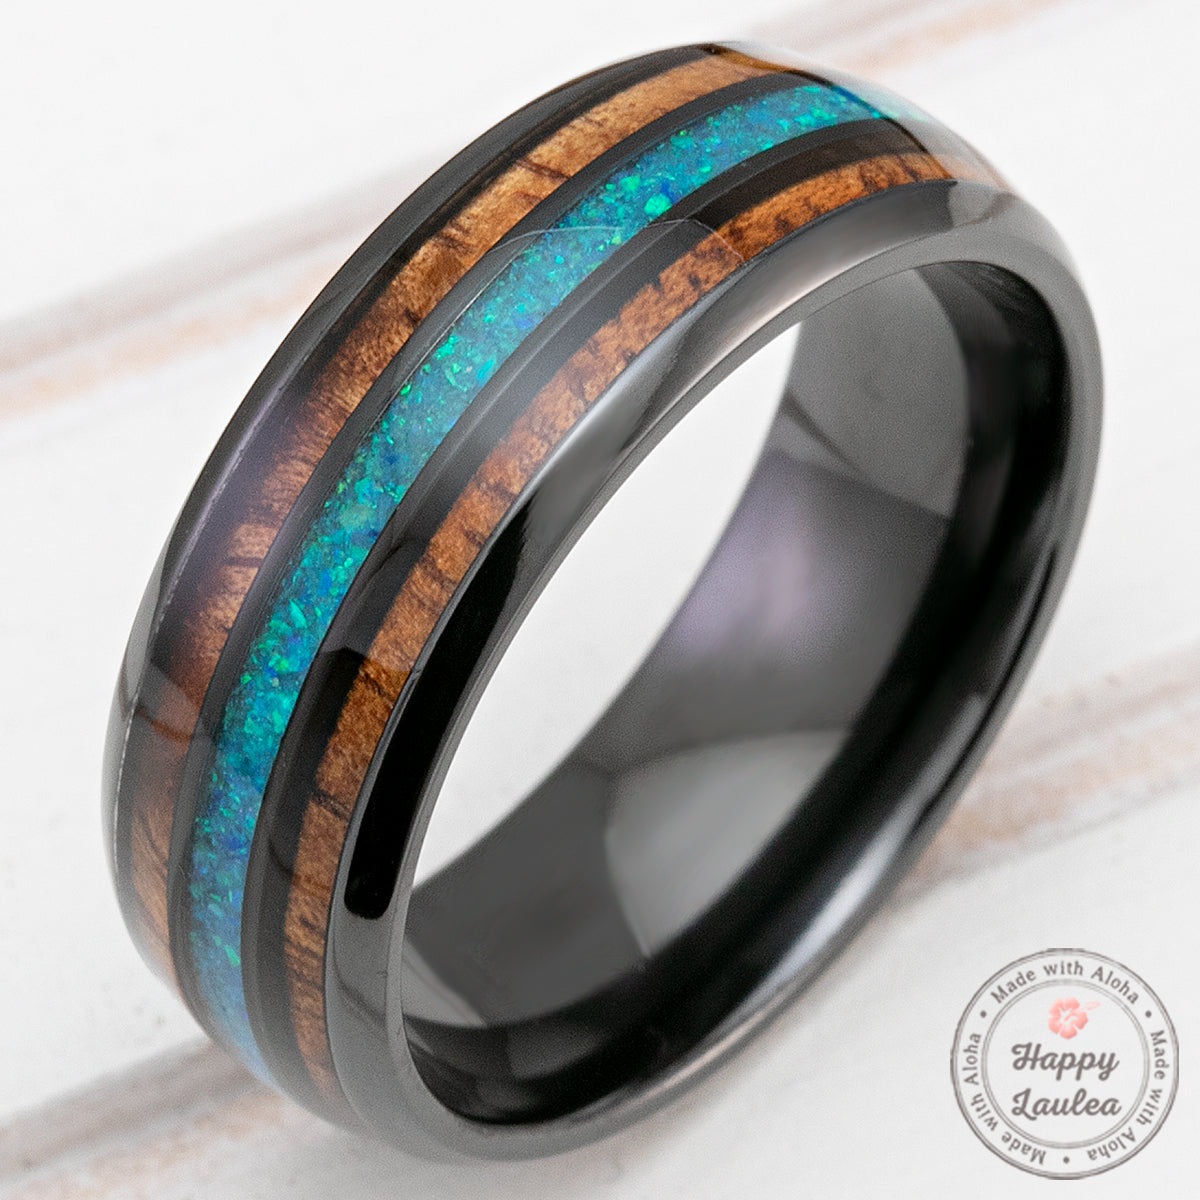 Pair of 6&8mm Zirconium Rings with Azure Blue Opal and Hawaiian Koa Wood Tri-Inlay - Dome Shape, Comfort Fitment